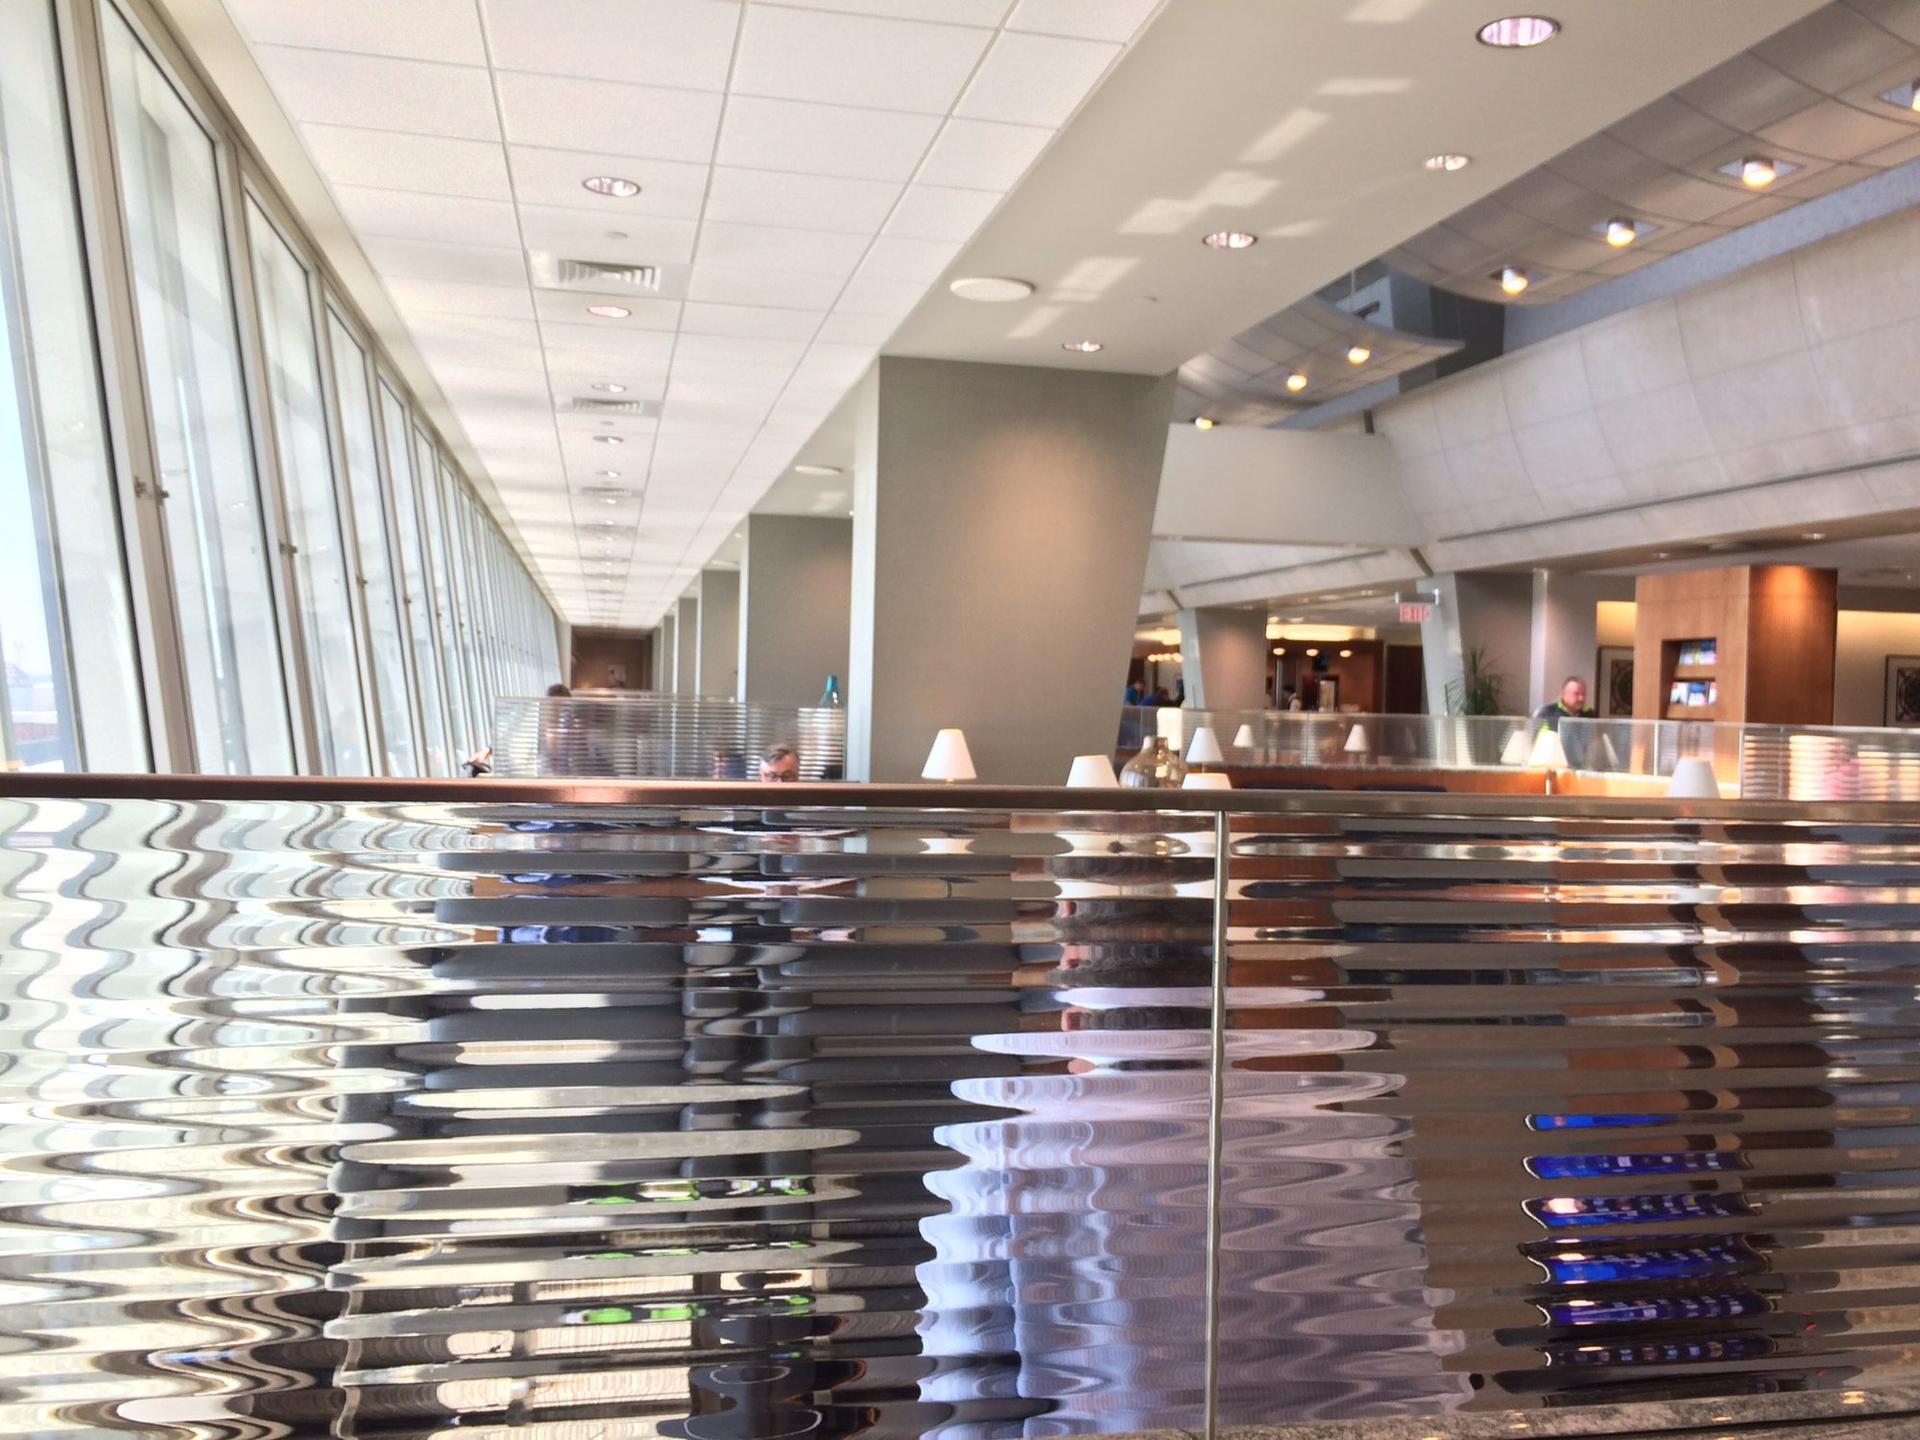 American Airlines Admirals Club image 31 of 48